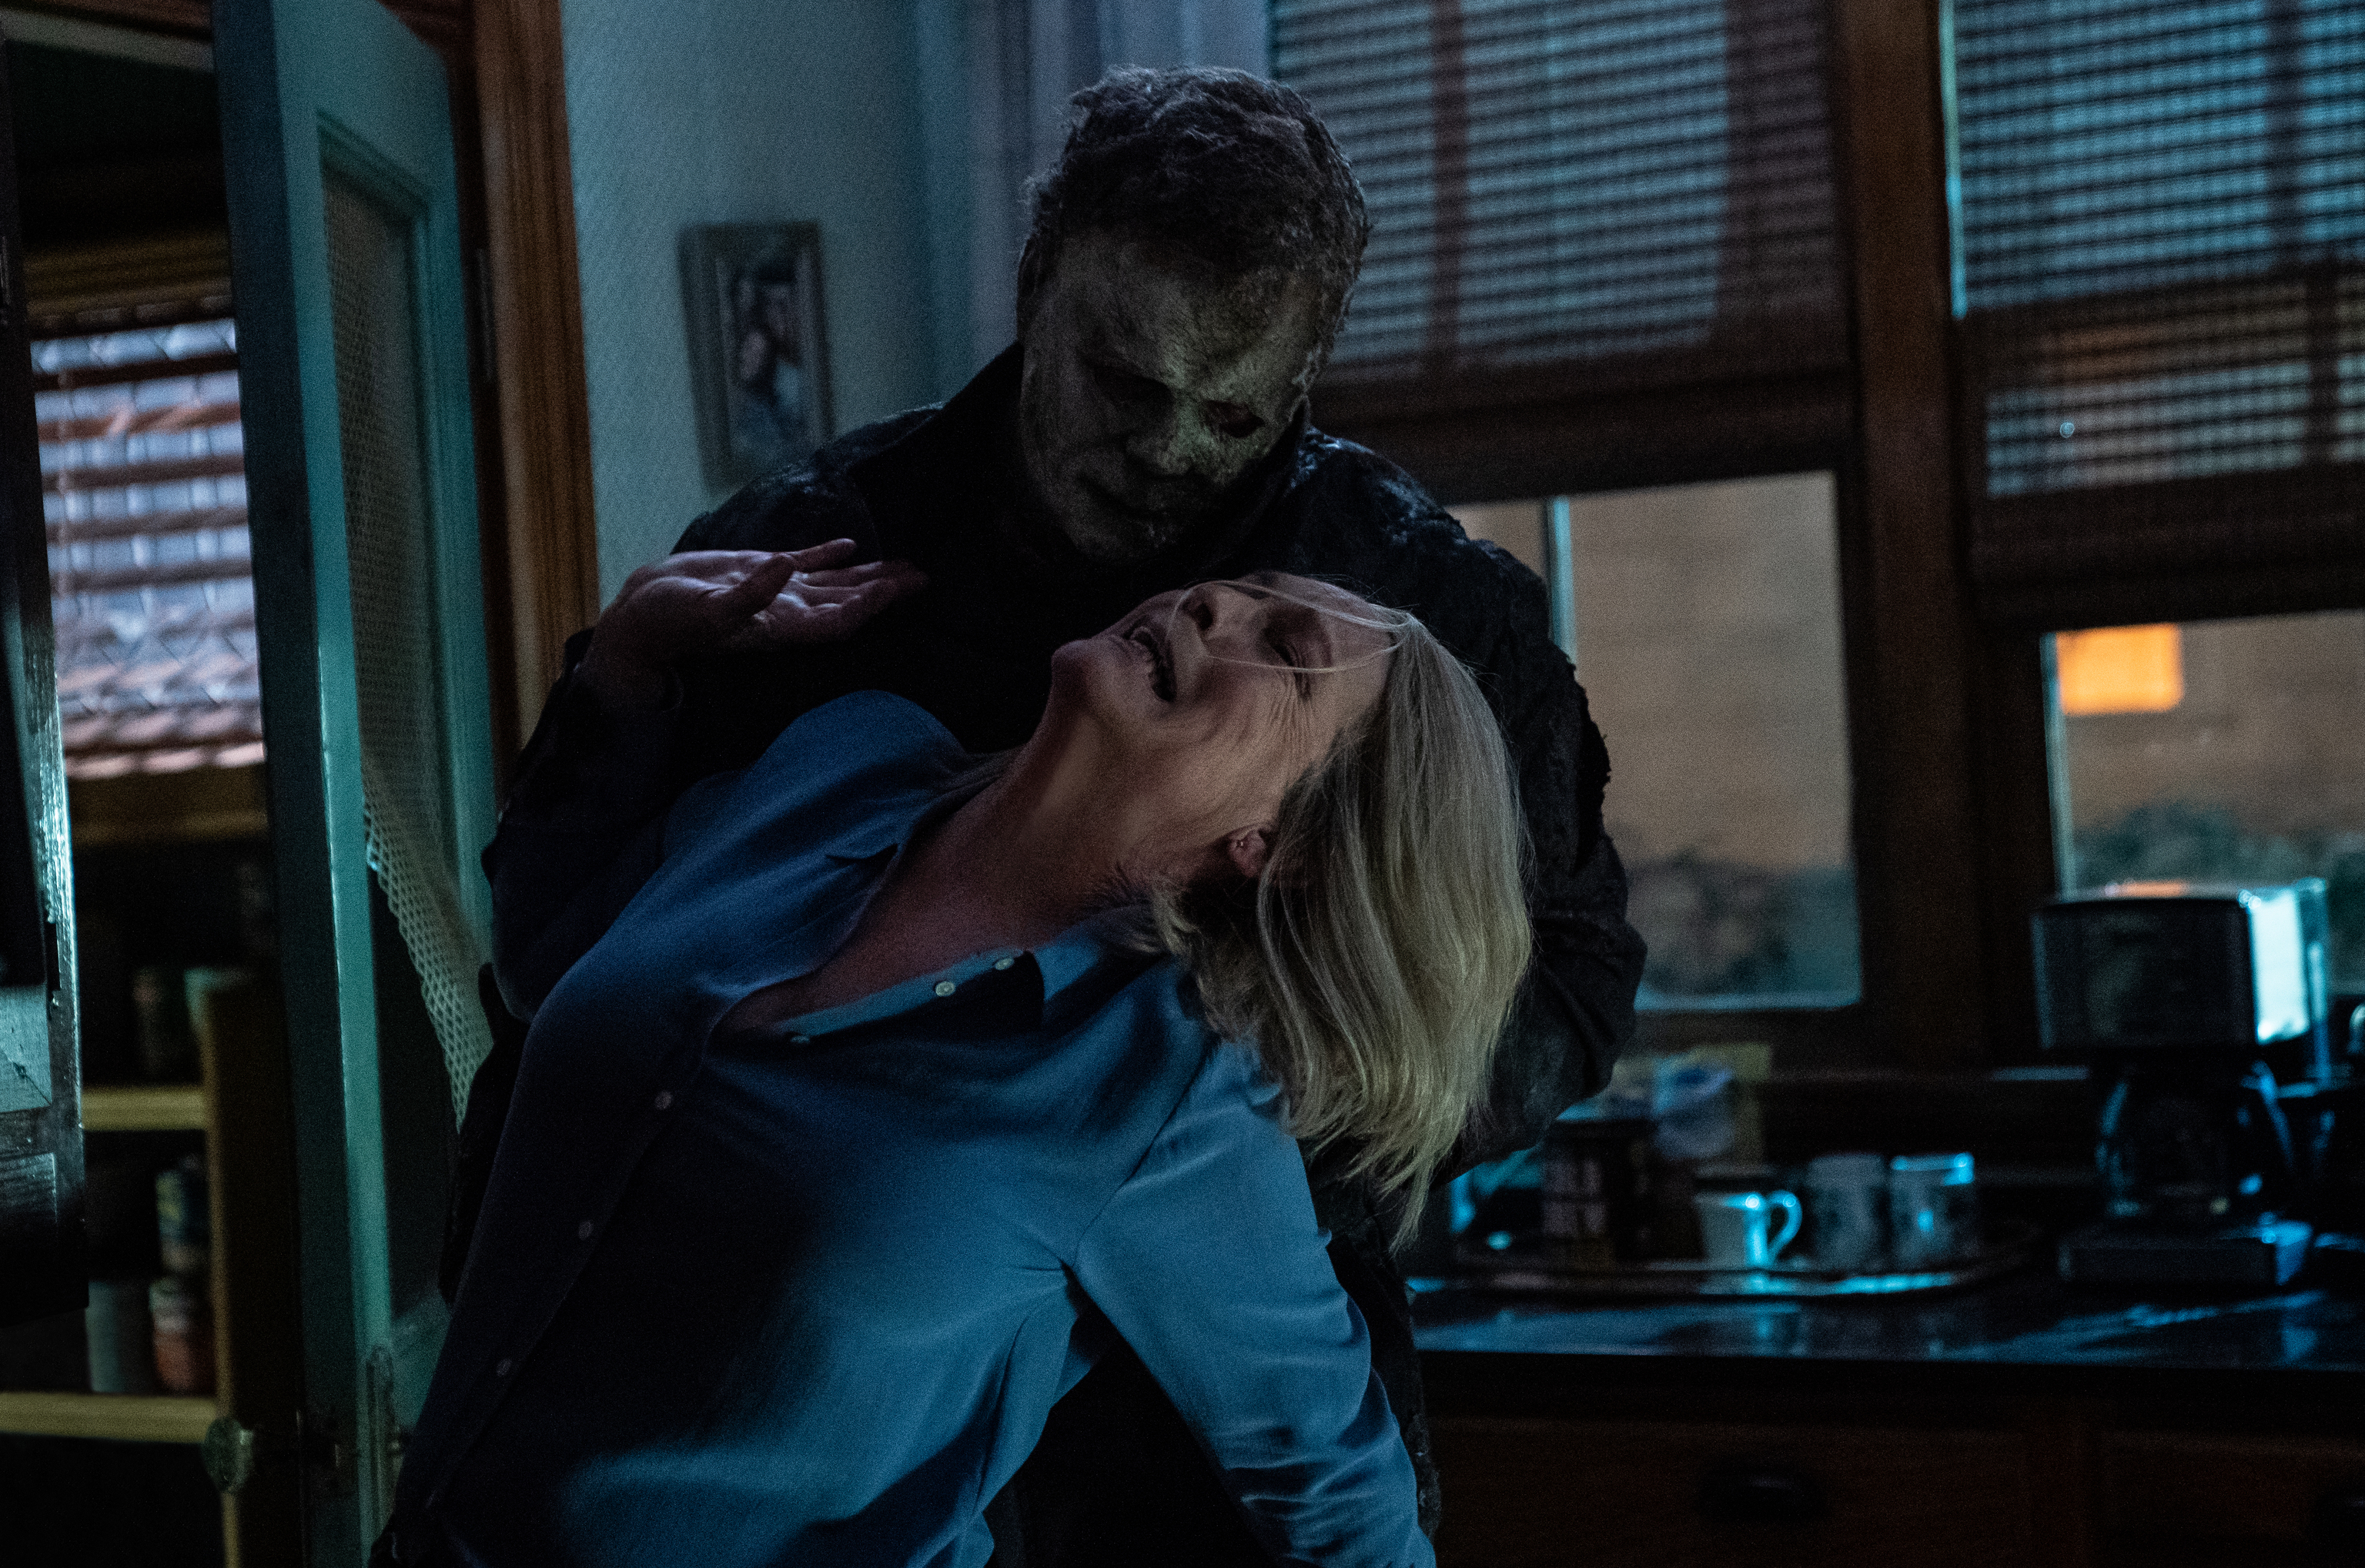 Laurie frente a frente con Michael Myers.